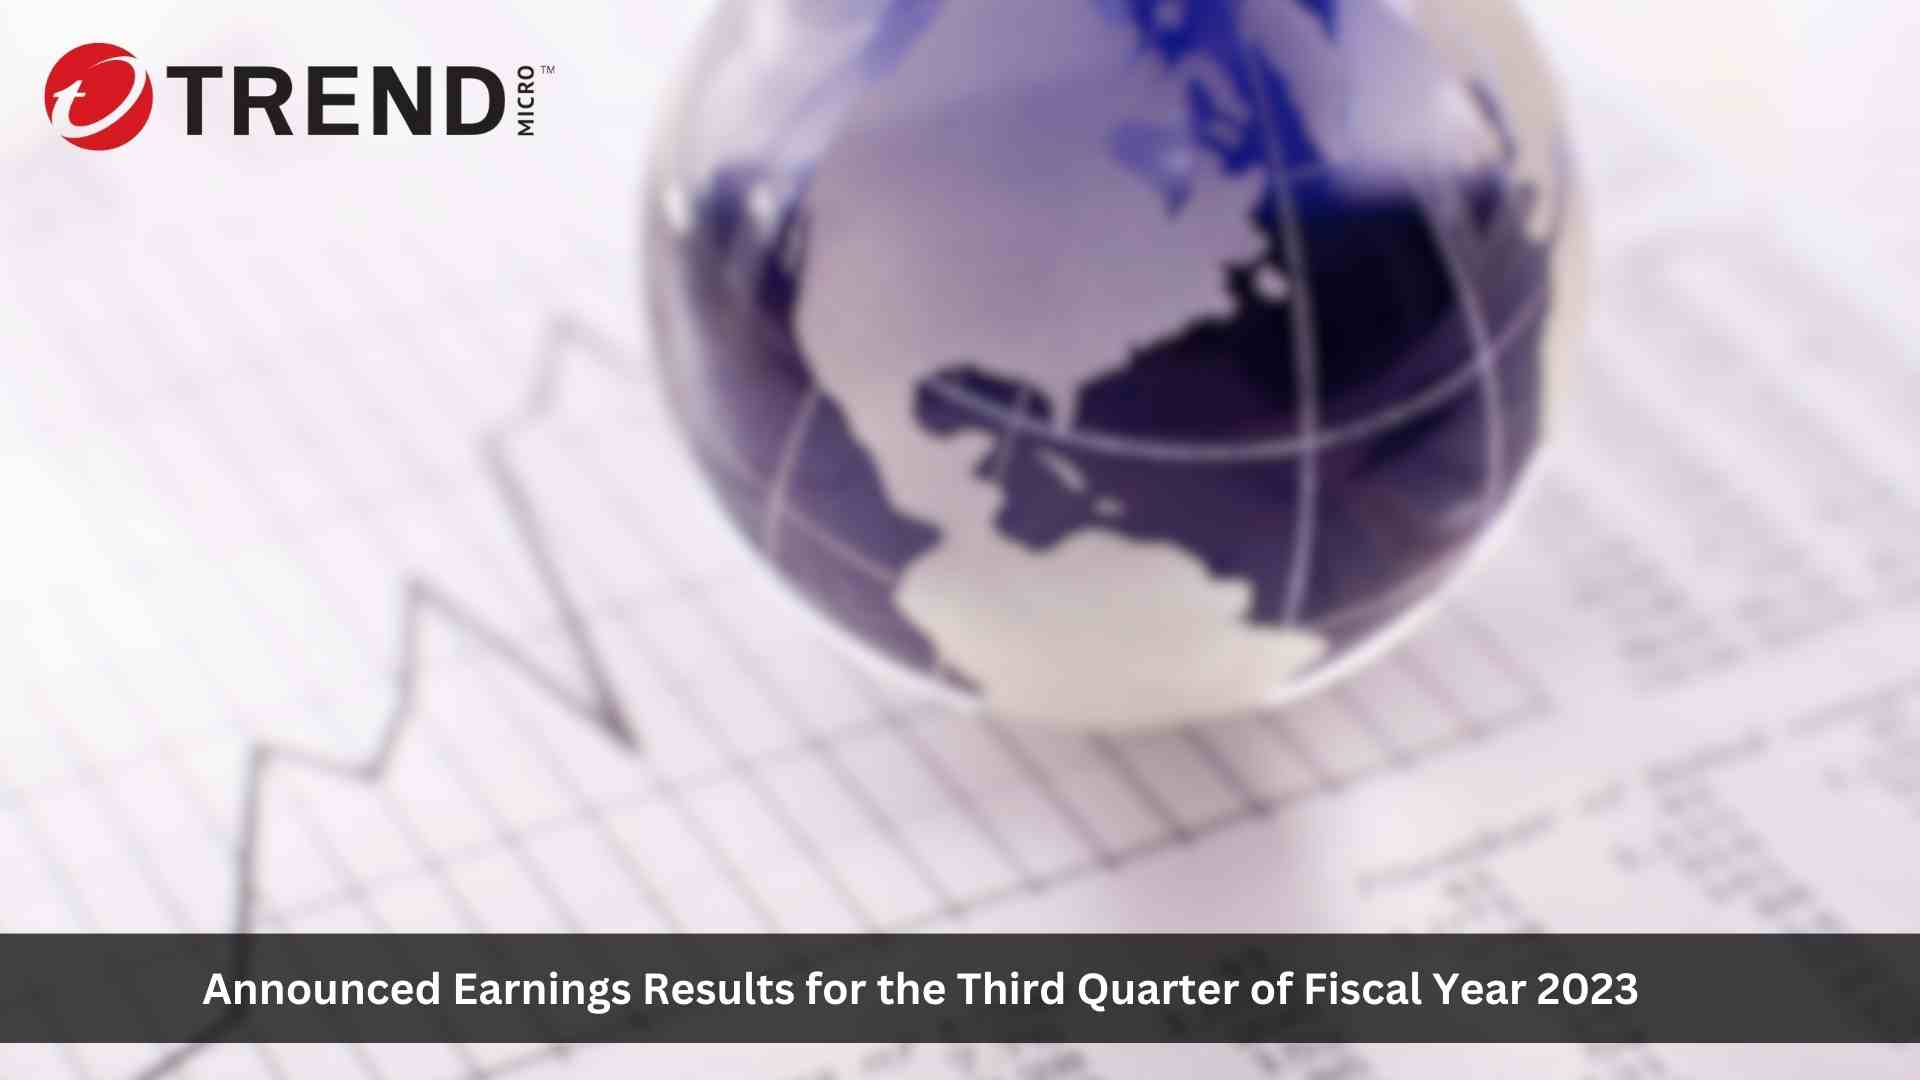 Trend Micro Reports Earnings Results for Q3 2023 Marking 100 Consecutive Quarters of Profitable Growth